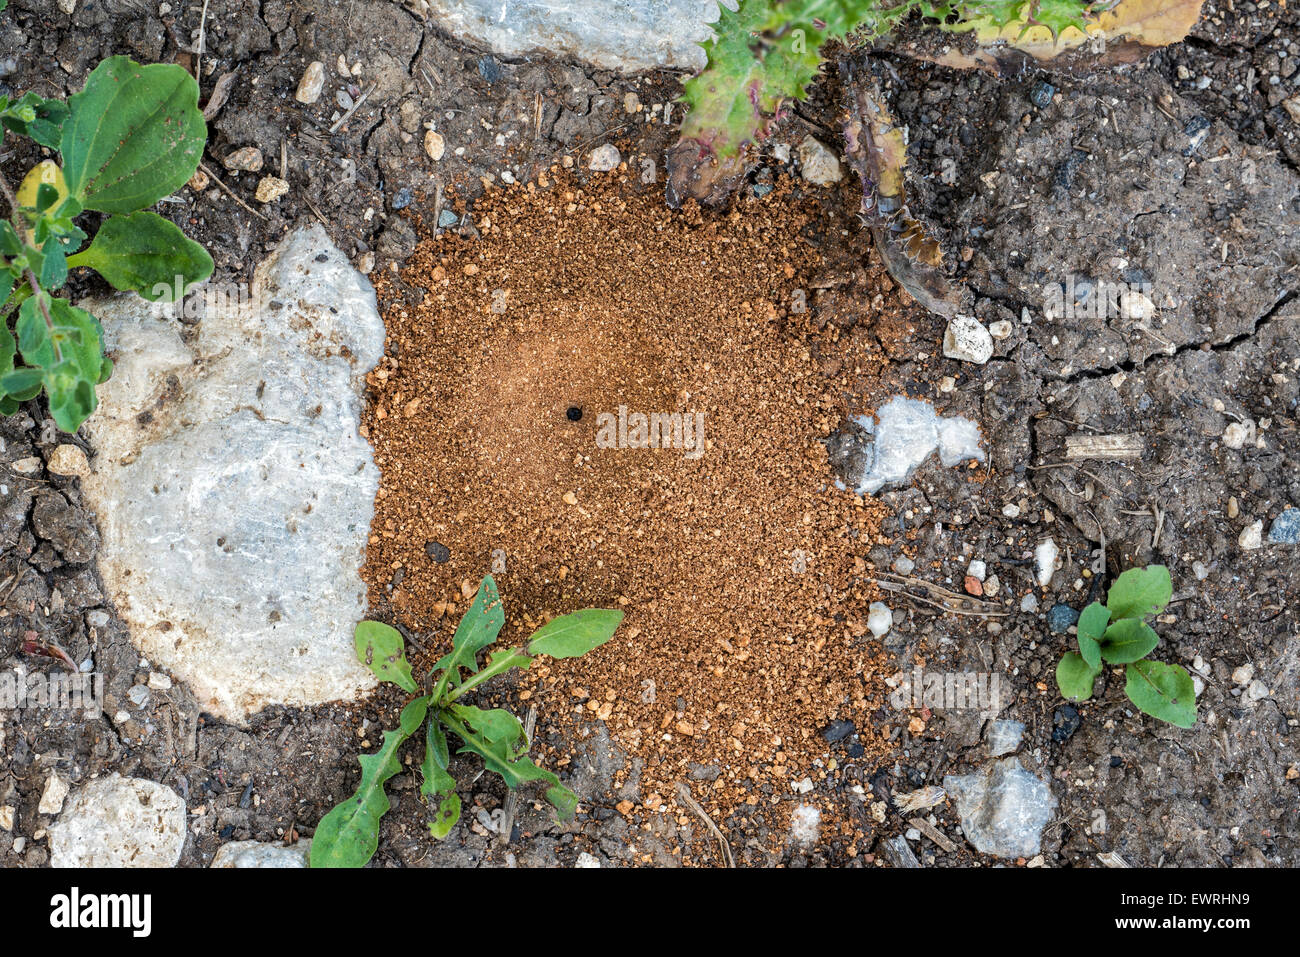 Cone shaped sand pit trap of an antlion / ant lion (Myrmeleontidae) Stock Photo